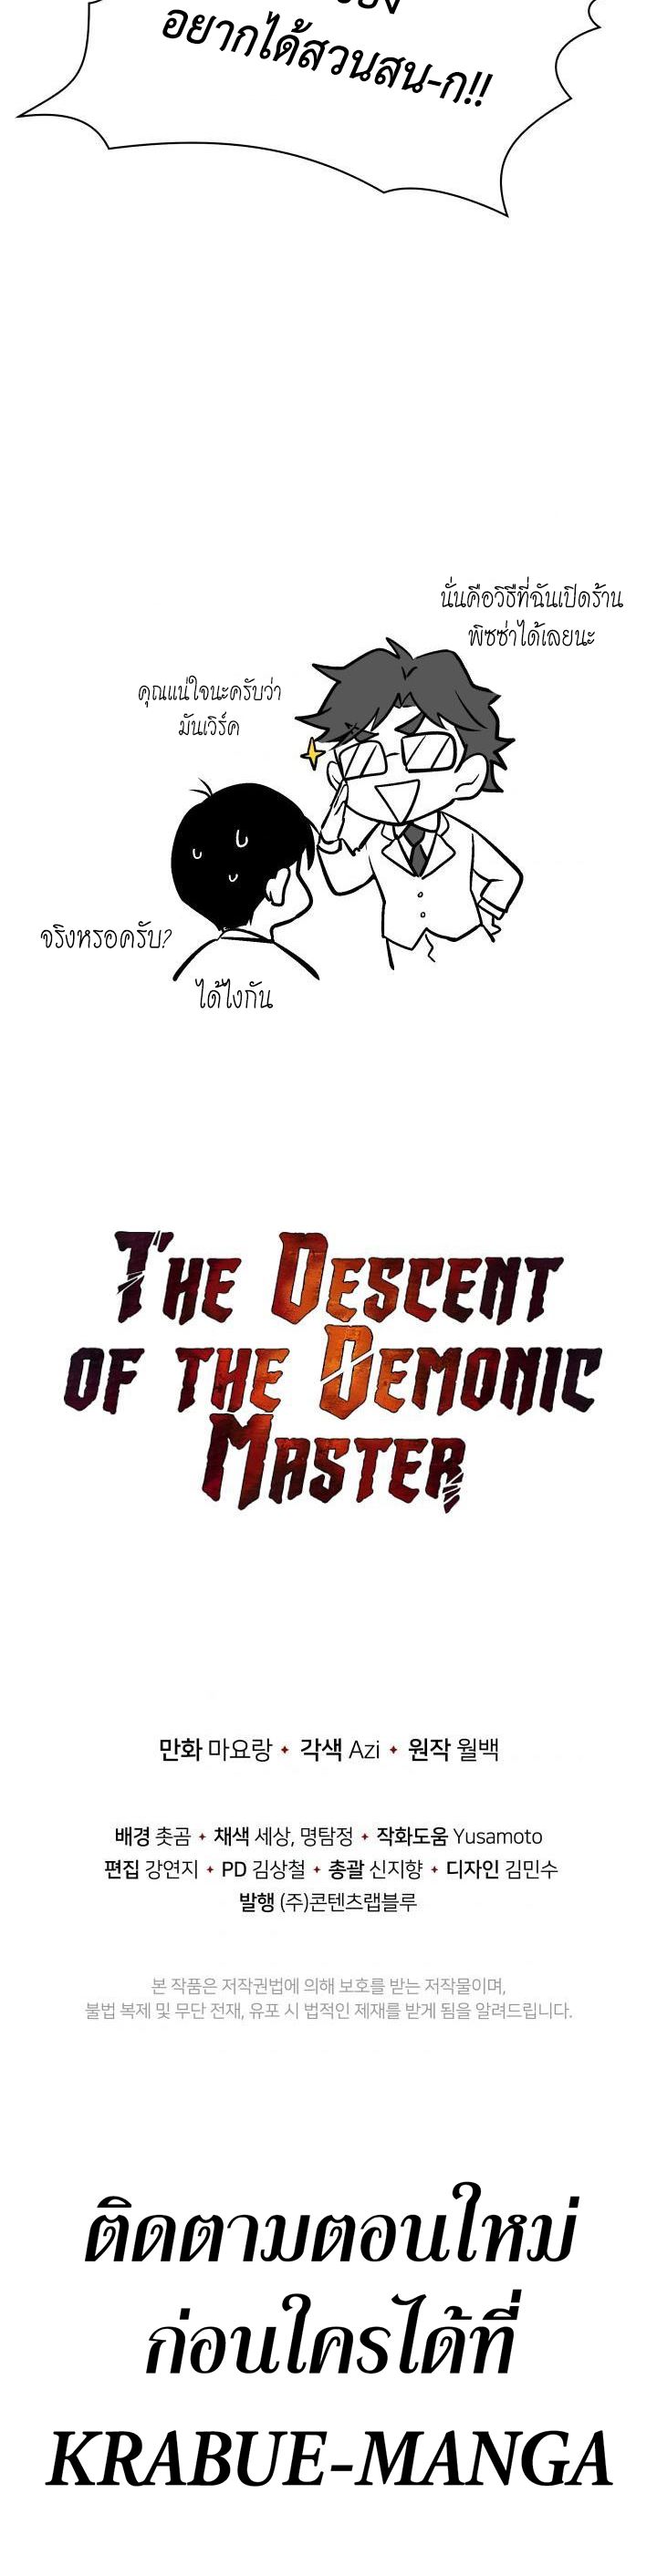 The Descent of the Demonic Master 99 (36)